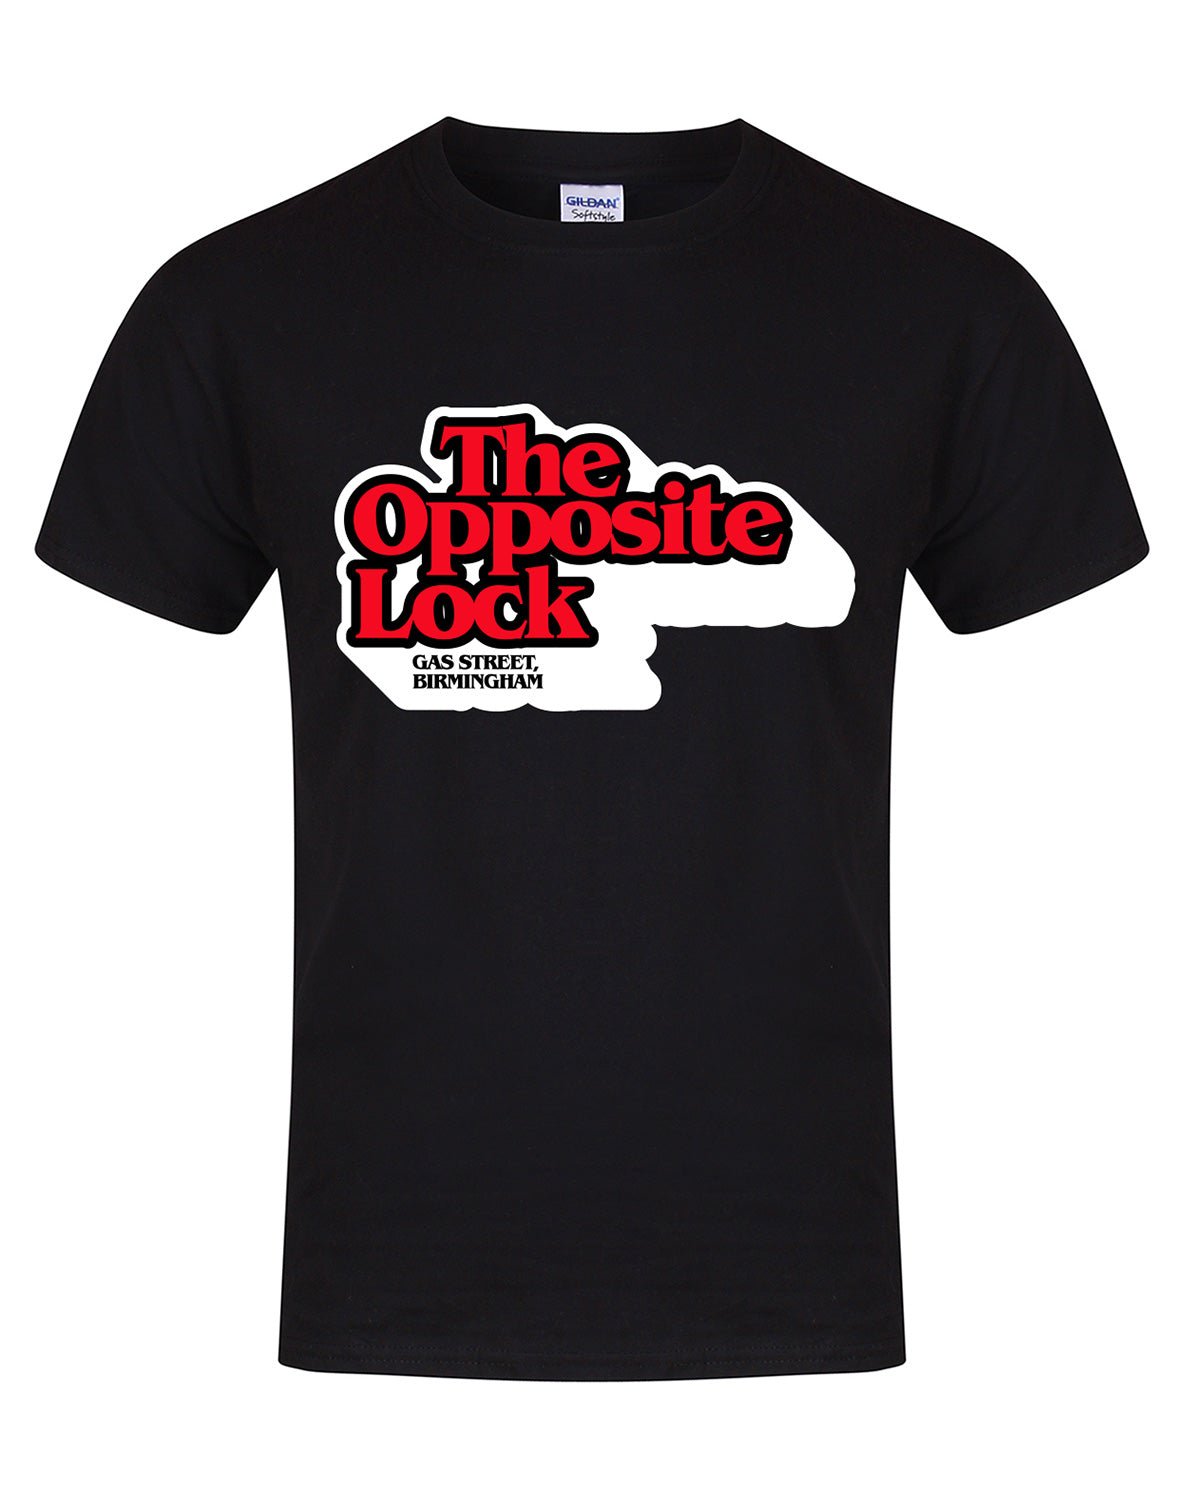 The Opposite Lock unisex fit T-shirt - various colours - Dirty Stop Outs